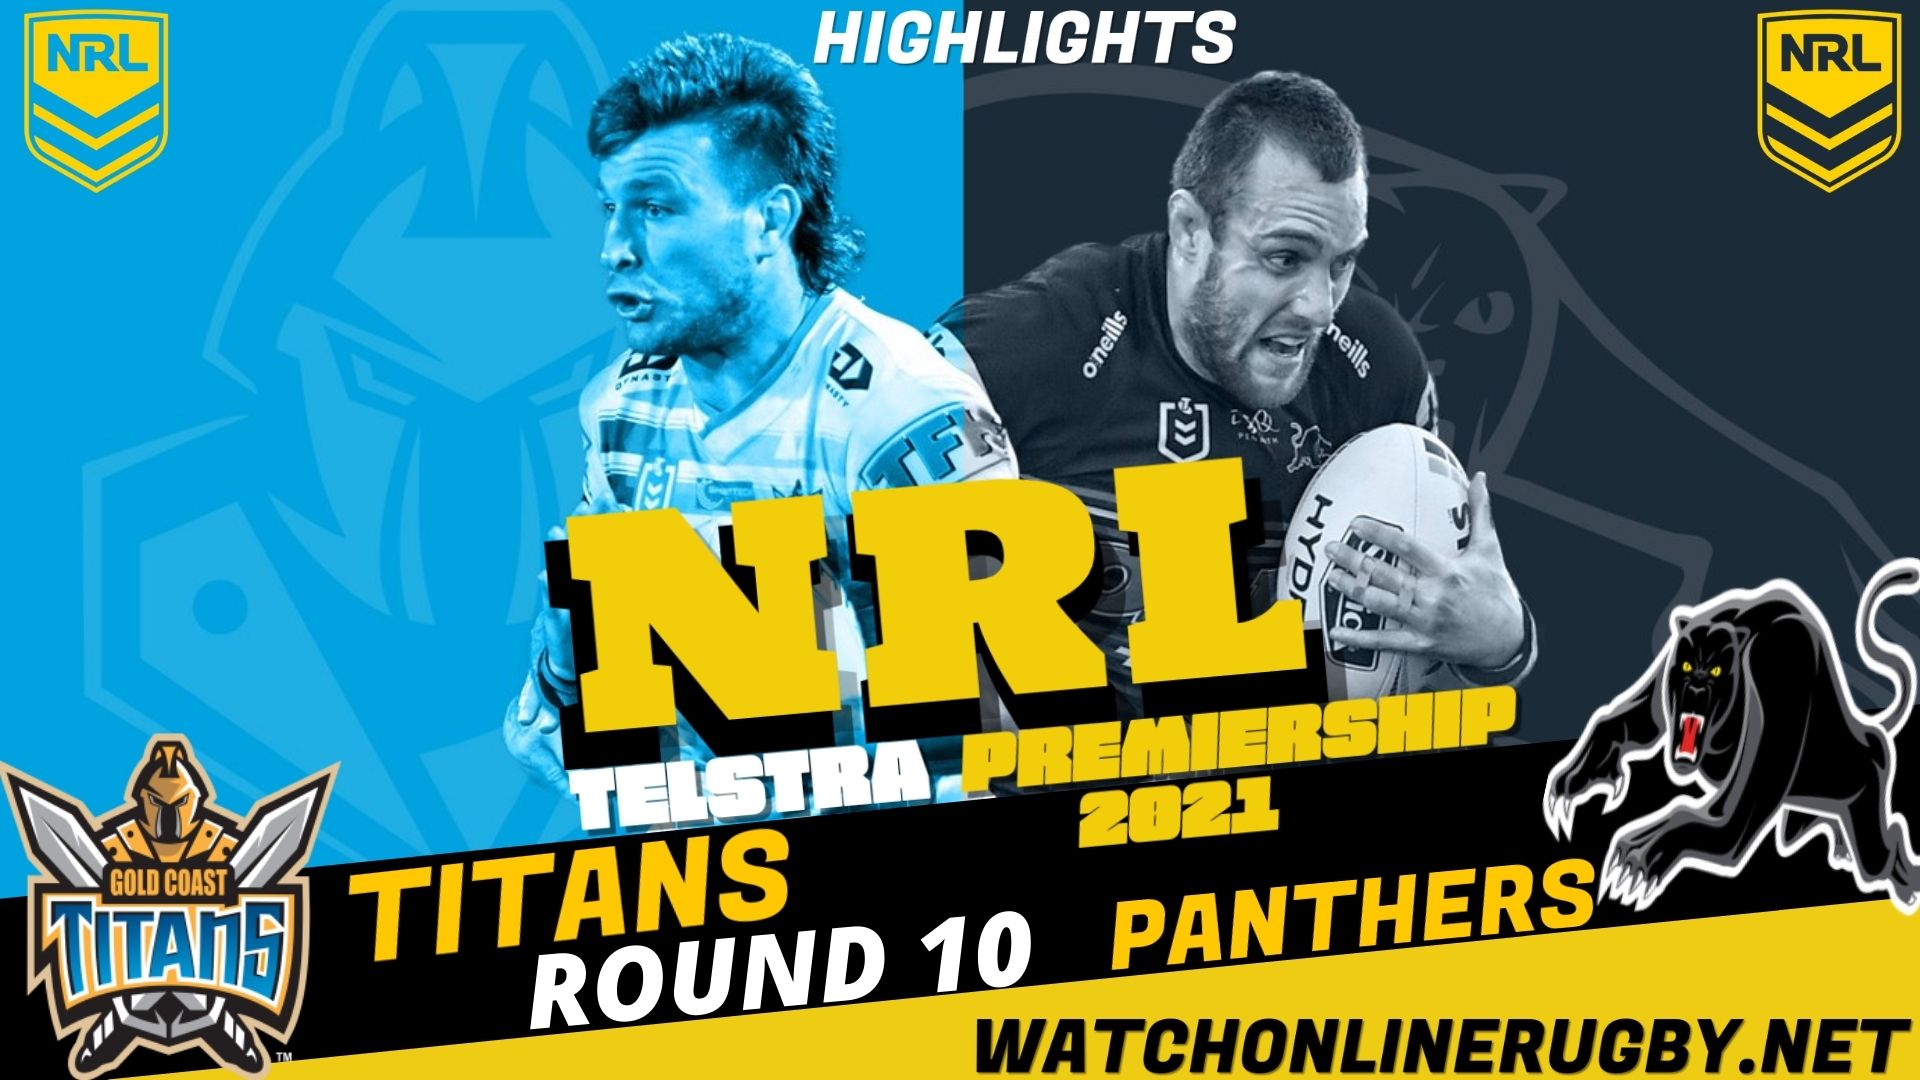 Titans Vs Panthers Highlights RD 10 NRL Rugby